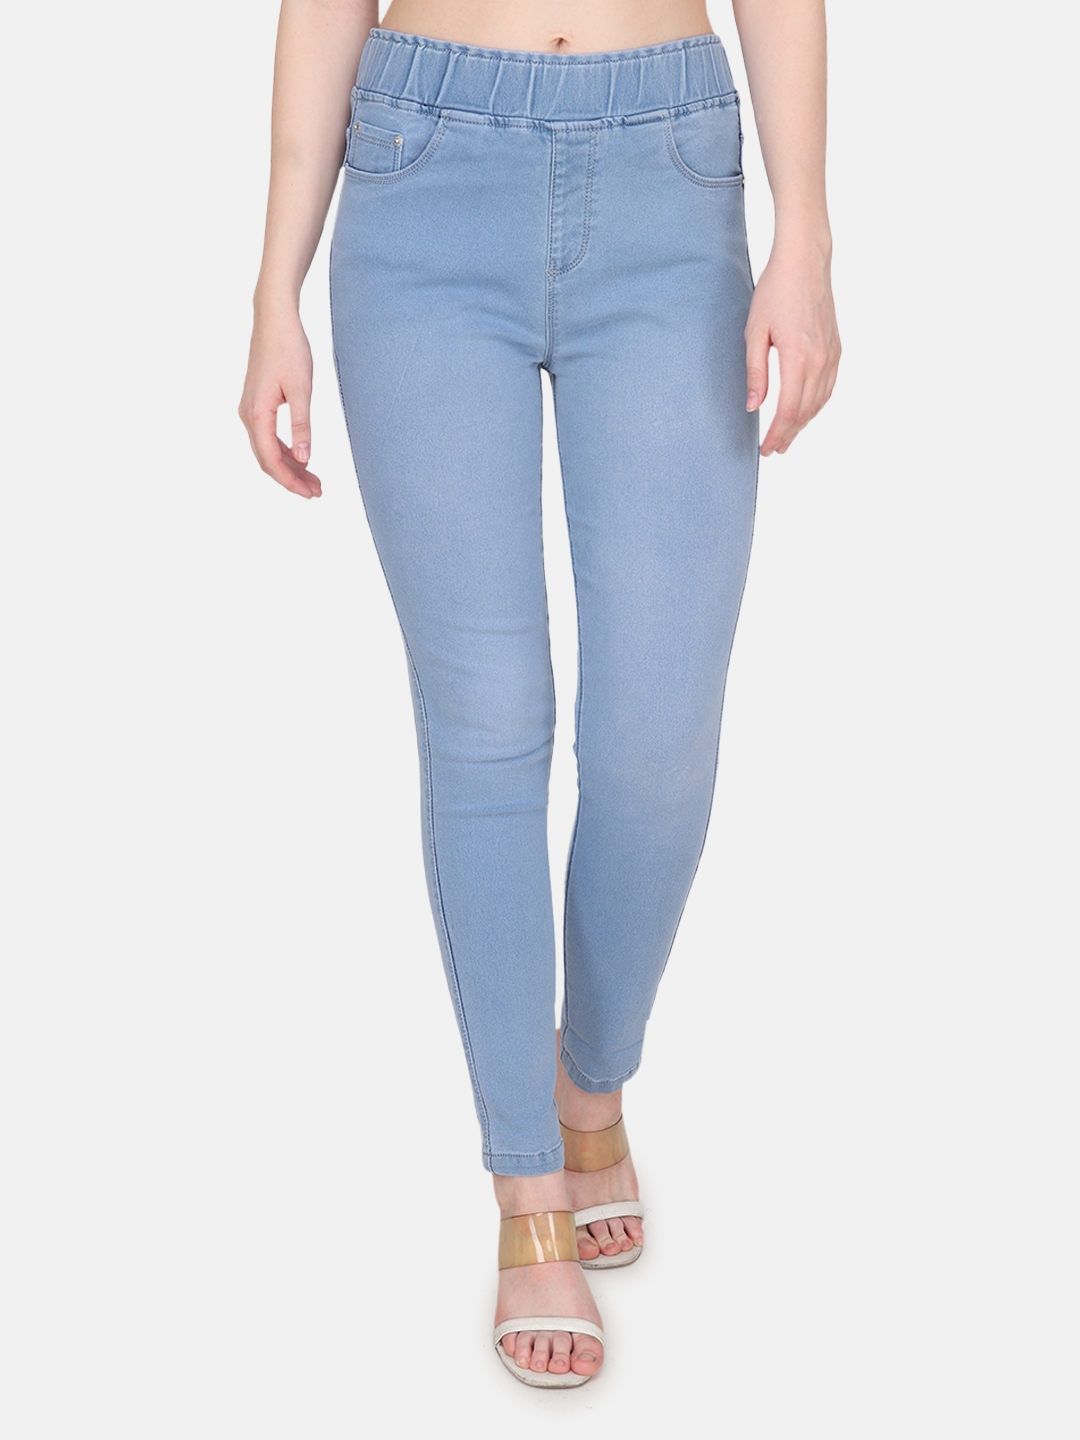 Albion | Albion By CnM Women Stretchable Light Blue Denim Jegging 0